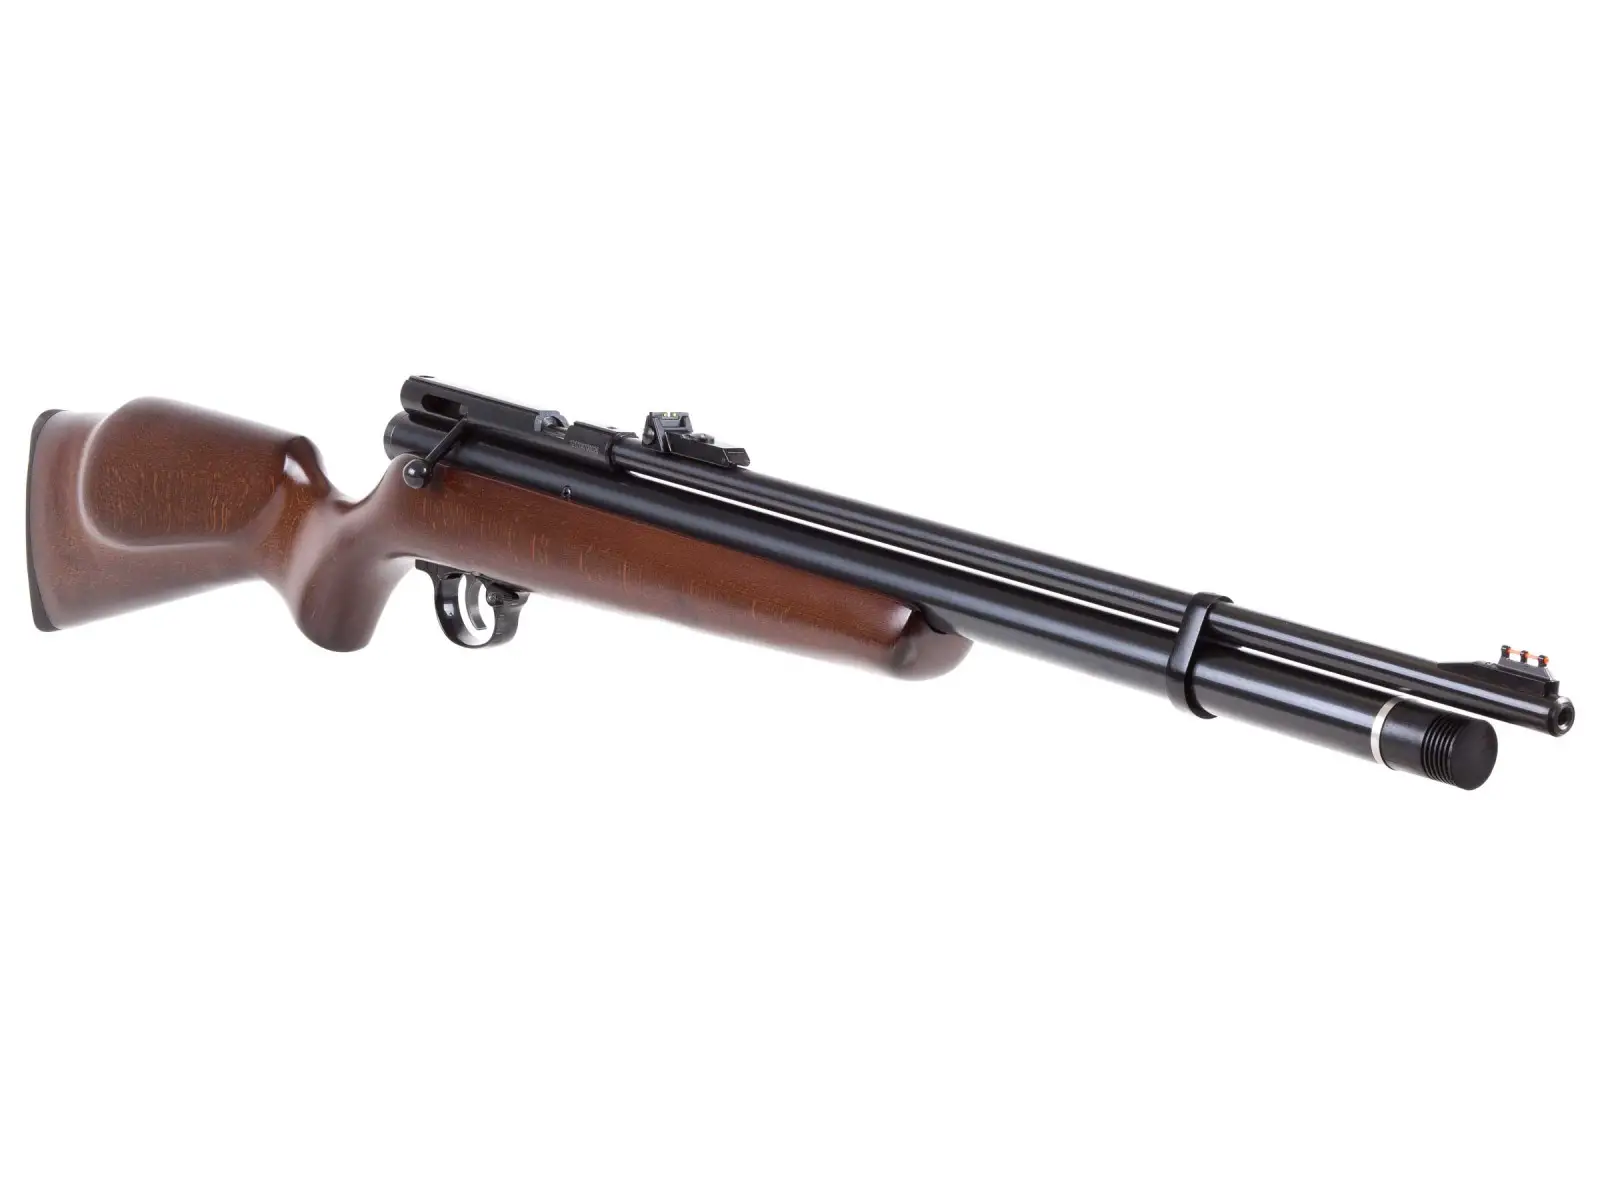 qb Best Air Rifles Under $200 - Top 5 budget guns for the money 2022 (Reviews and Buying Guide)